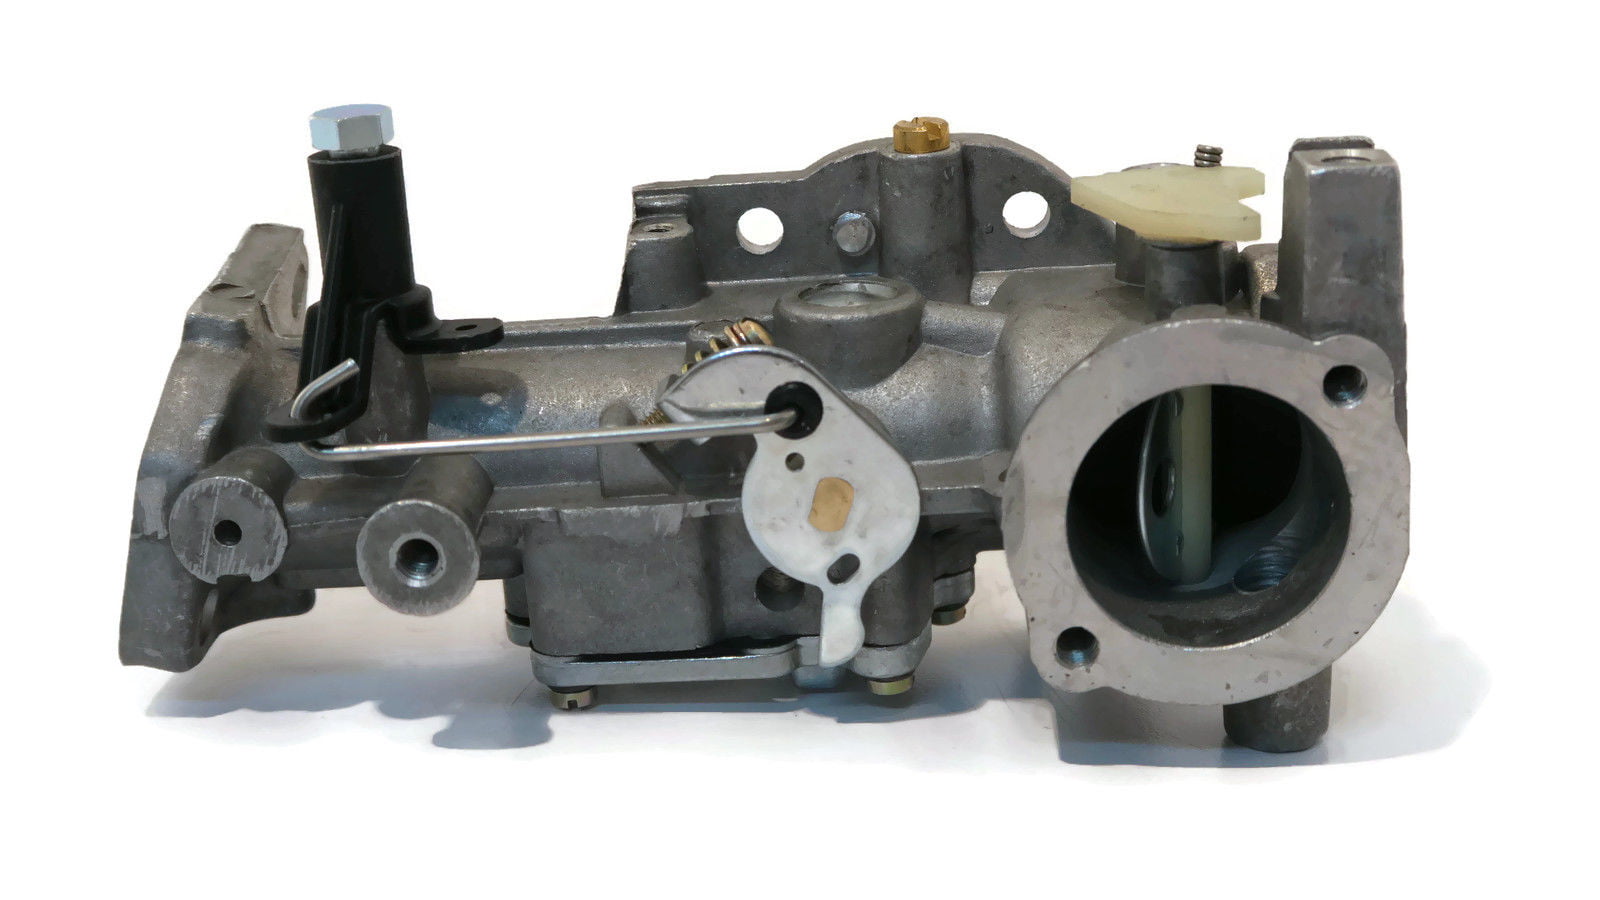 Carburetor 498298 for Briggs & Stratton Engines - Monster Scooter